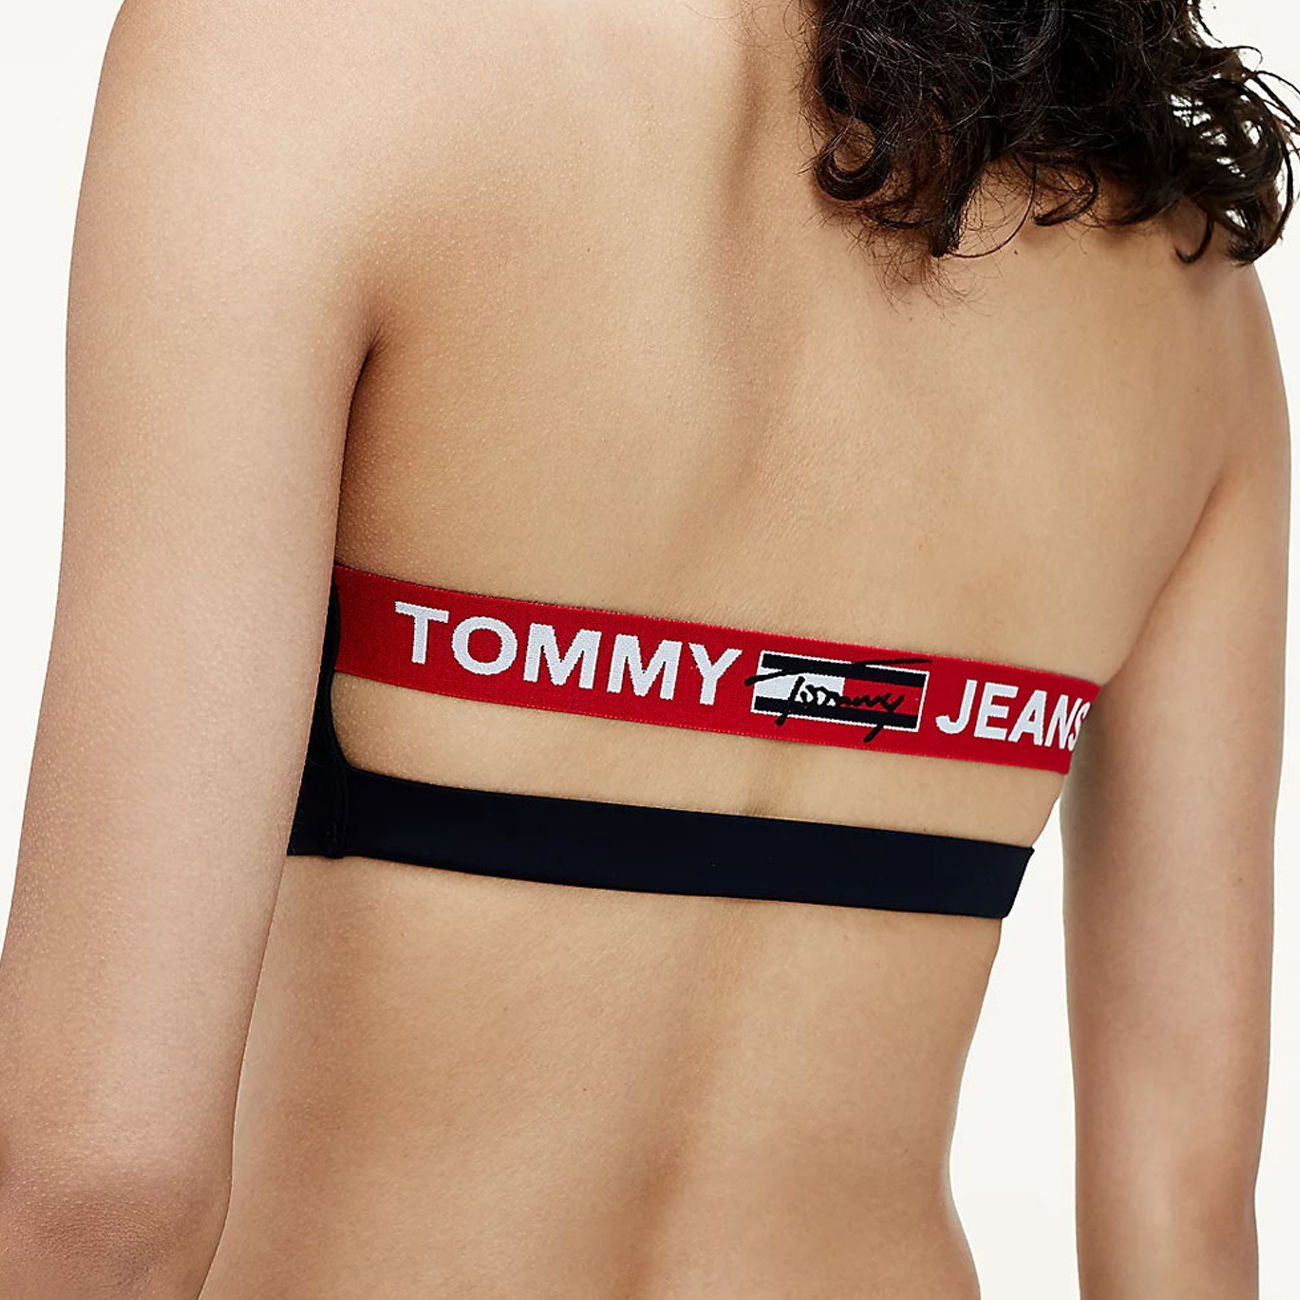 Very angry Youth race TOMMY HILFIGER UNDERWEAR COLOR BLOCK HEADBAND SWIMSUIT Woman Desert Sky |  Mascheroni Store